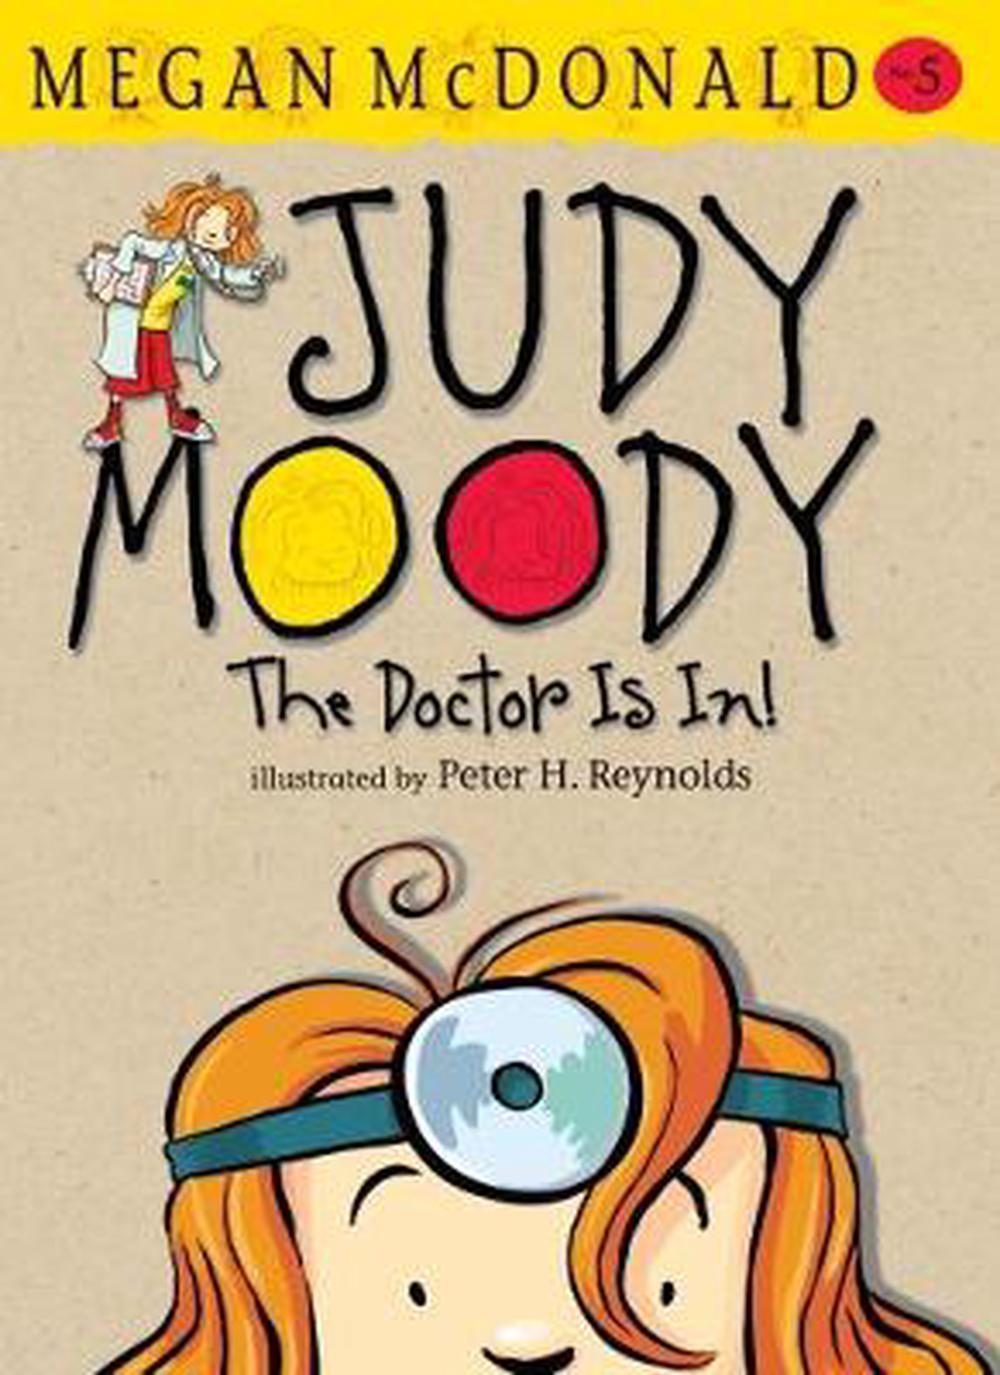 Book 5 Judy Moody The Doctor Is In